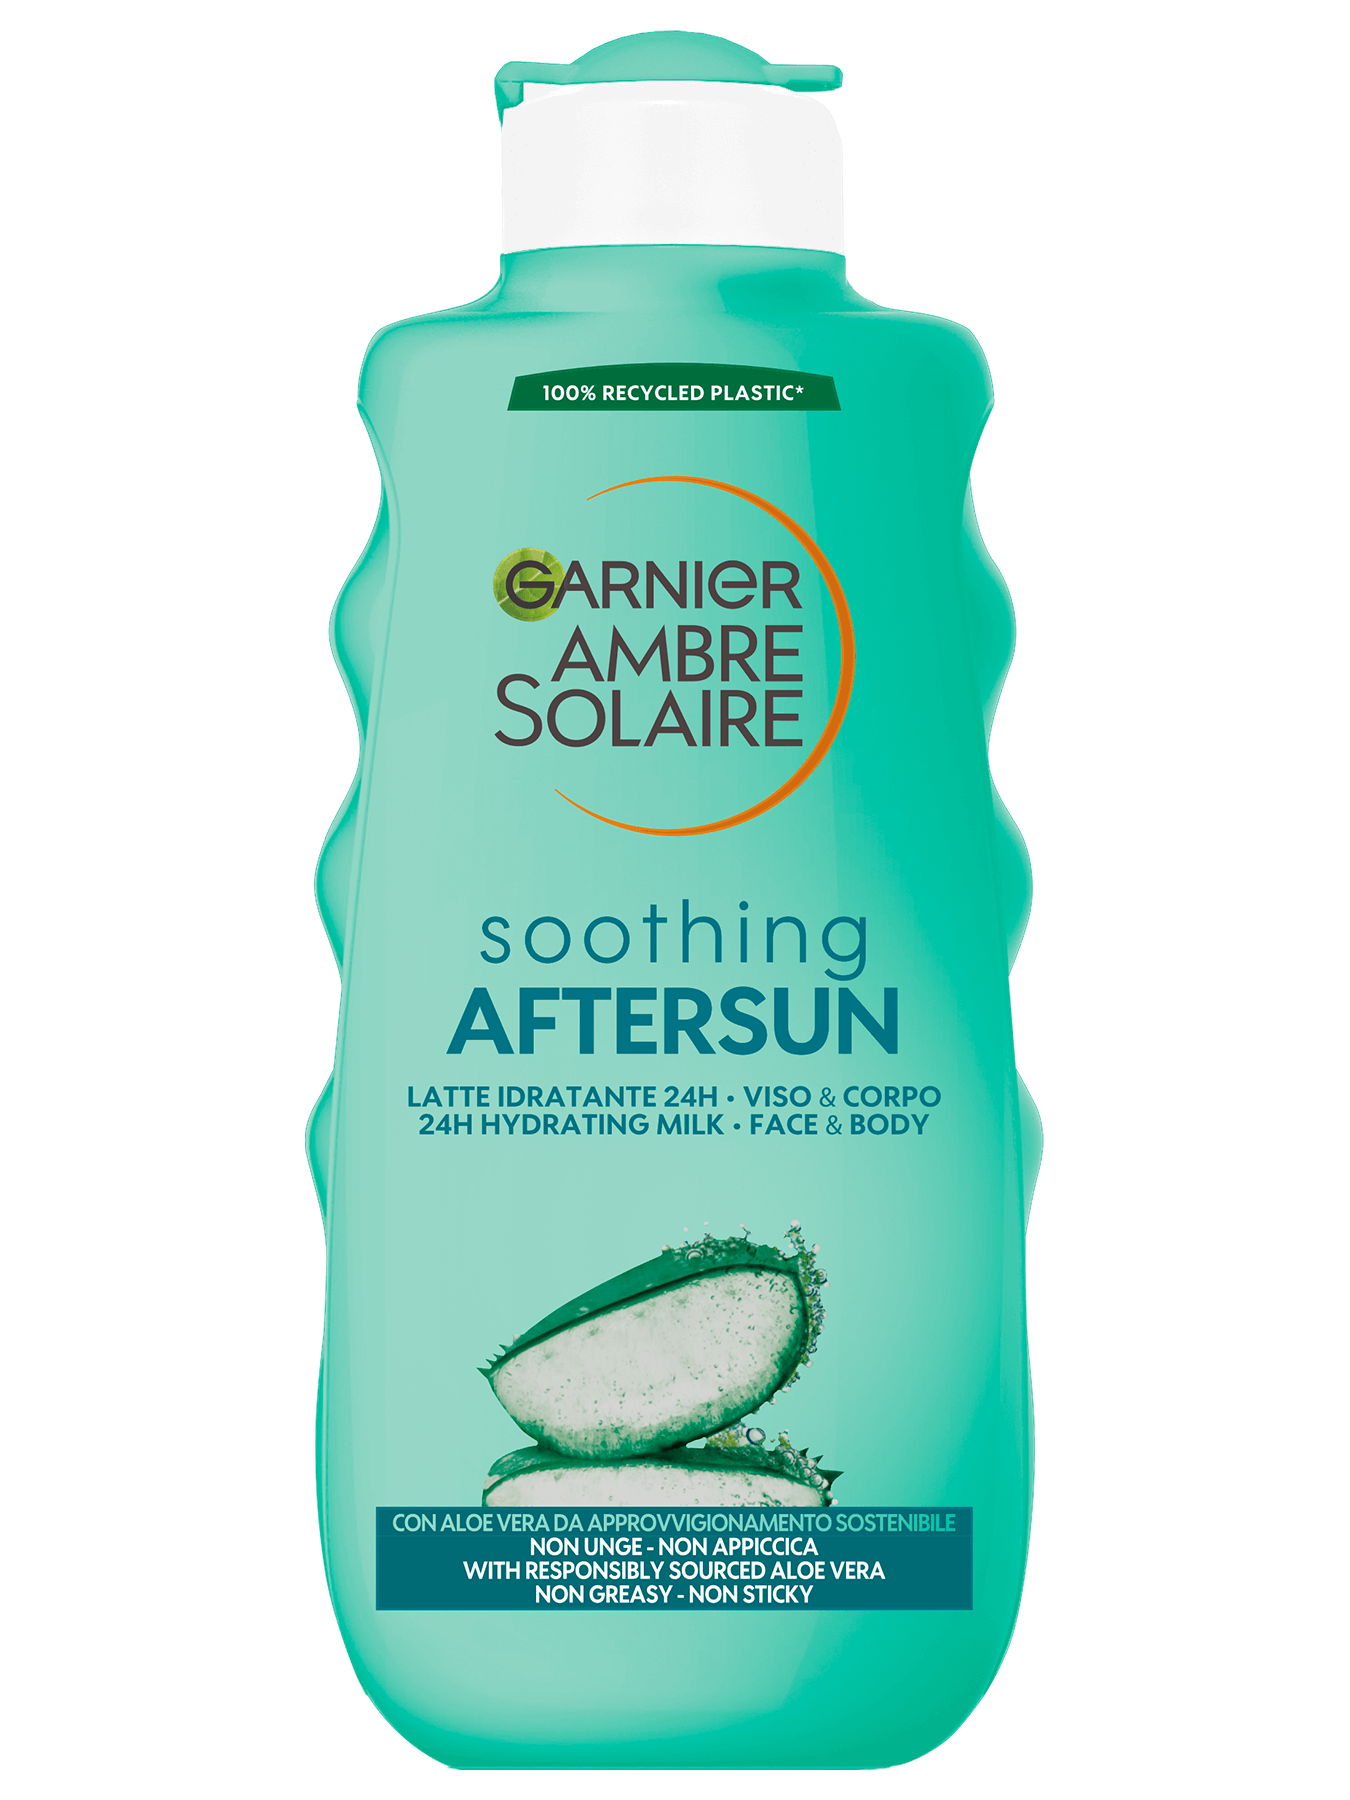 GAR Ambre Solaire Soothing AfterSun Melk 200ml 2021 front 3000x3000px (1)